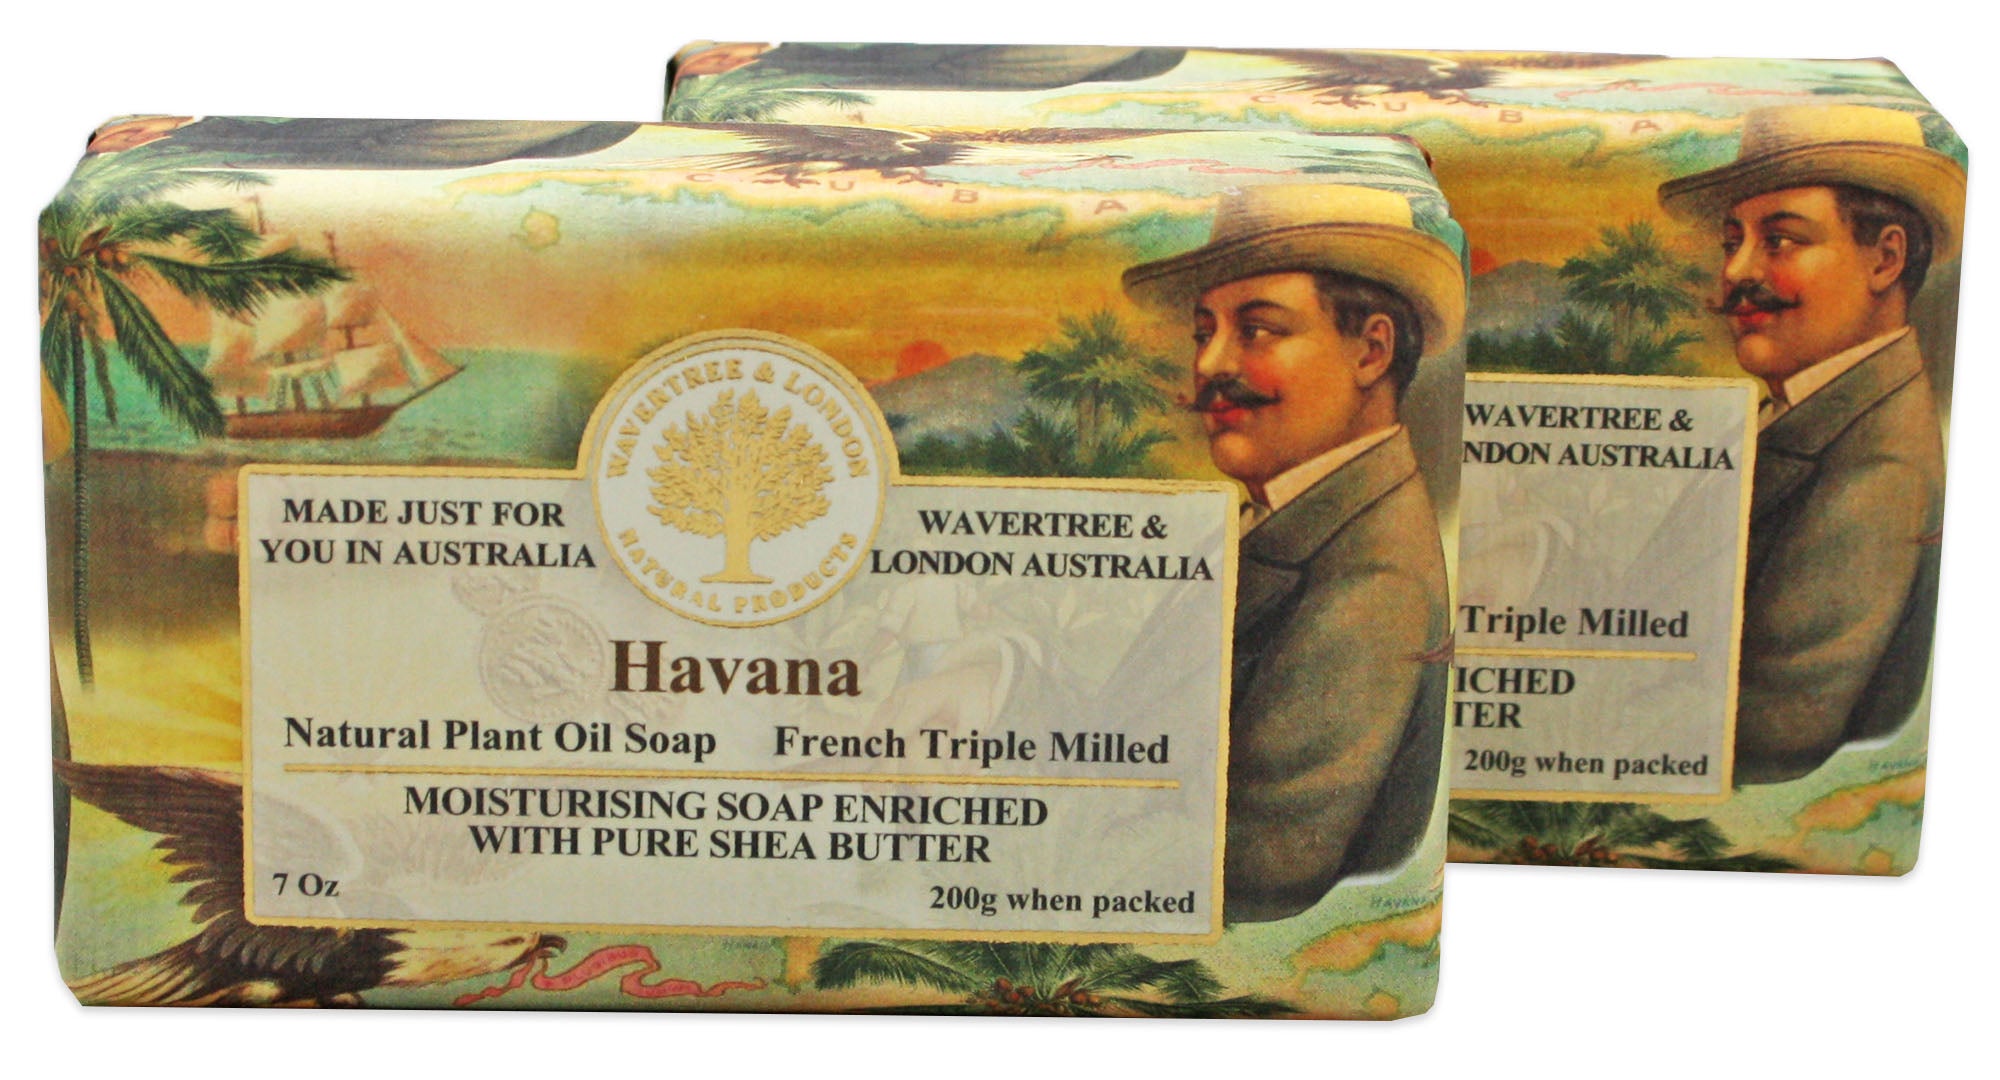 Wavertree & London Havana (2 Bars), 7oz Moisturizing Natural Soap Bar, French -Milled and enriched with Shea Butter